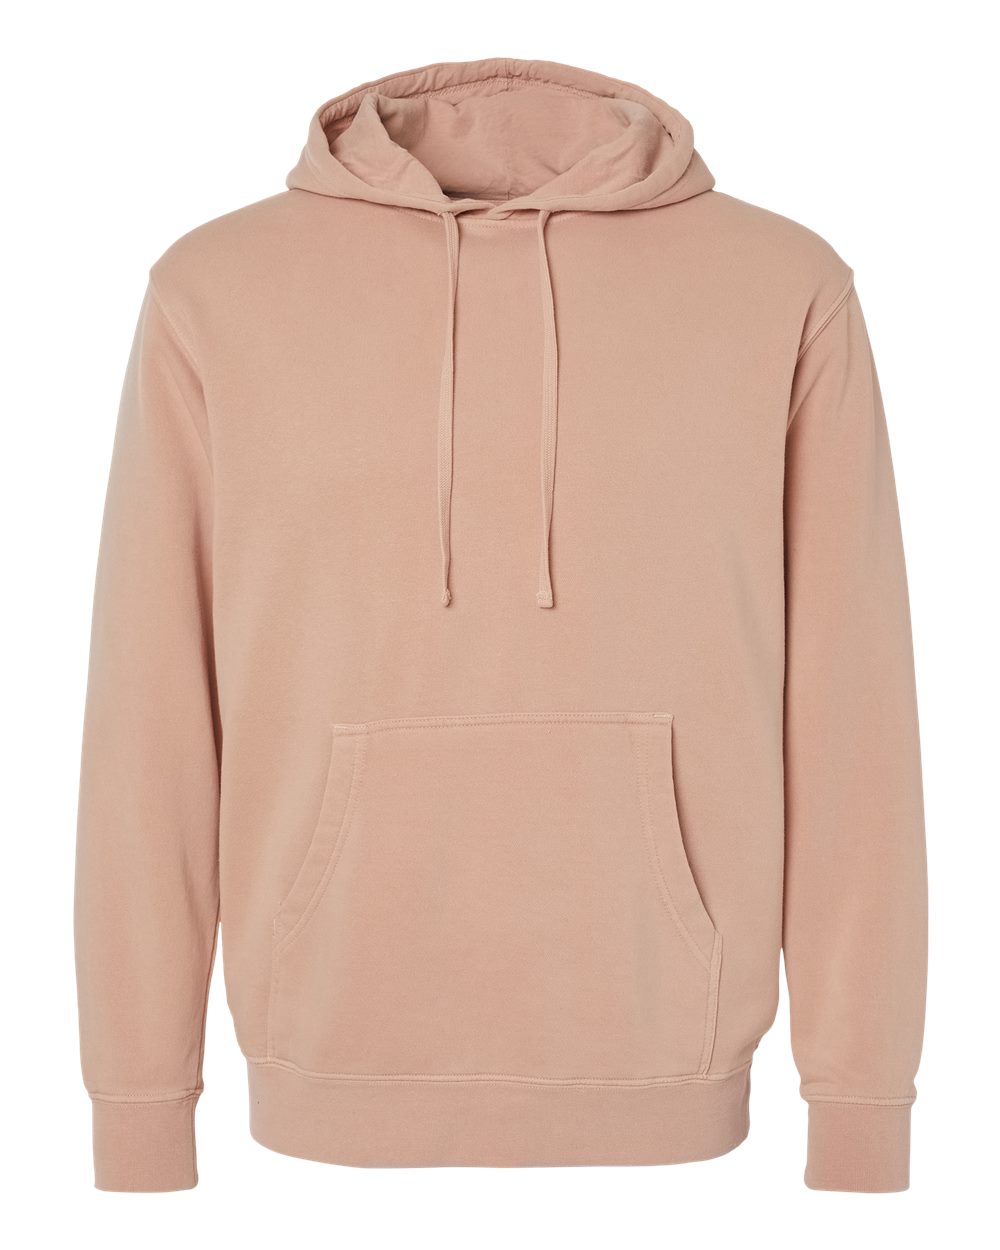 Independent Pigment-Dyed Hoodie (PRM4500) in Pigment Dusty Pink